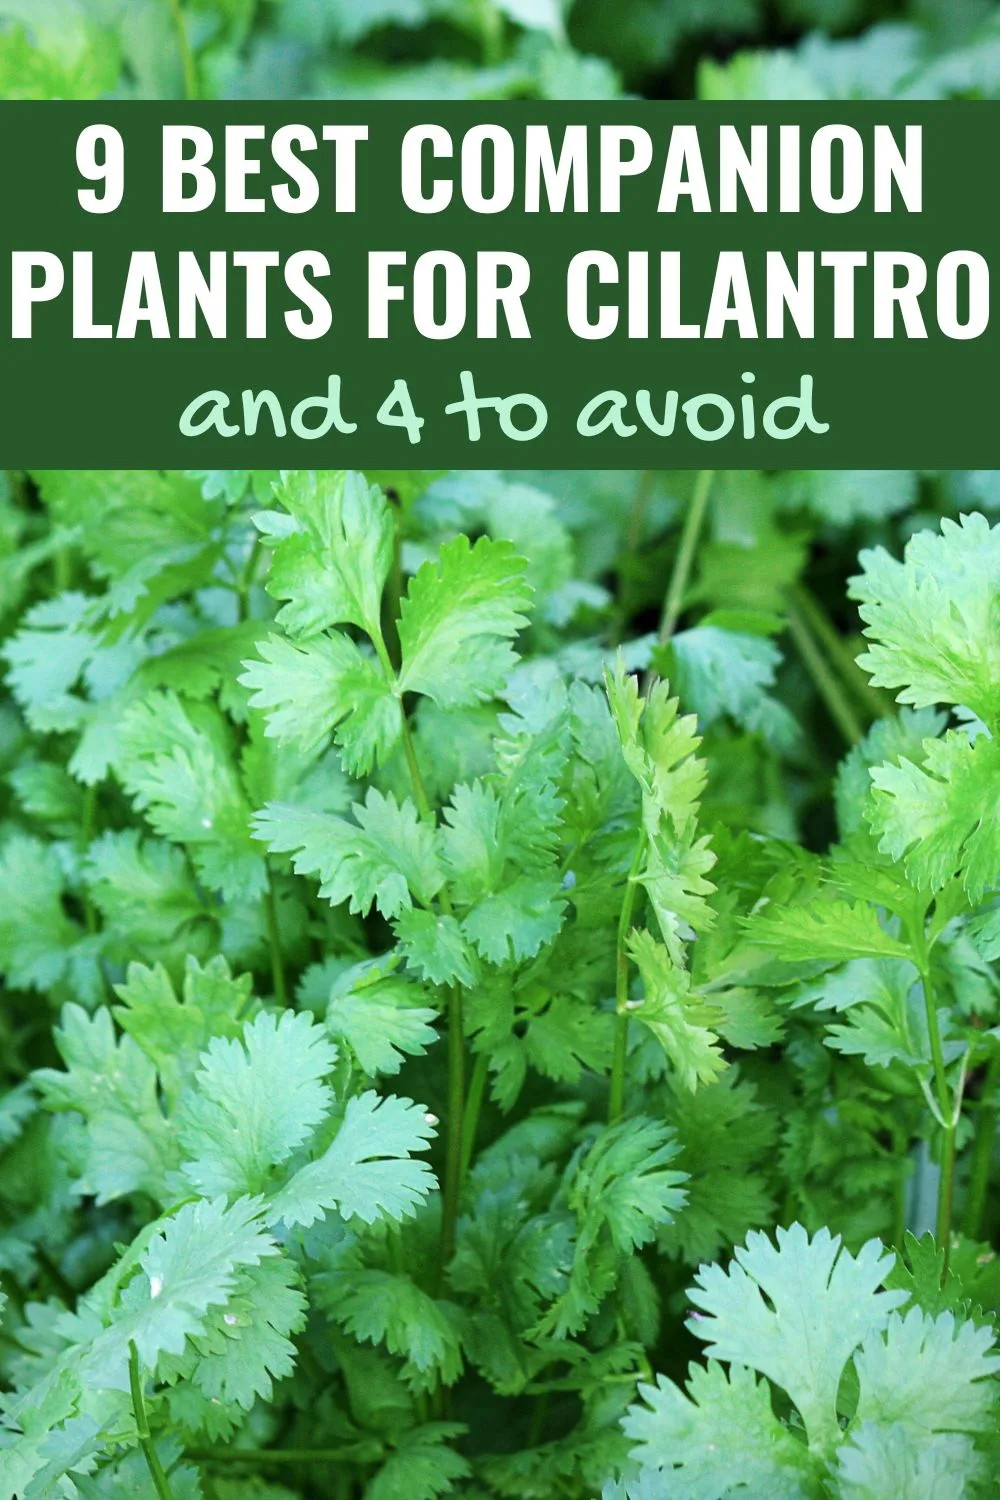 9 Best Companion Plants for Cilantro - and 4 to avoid